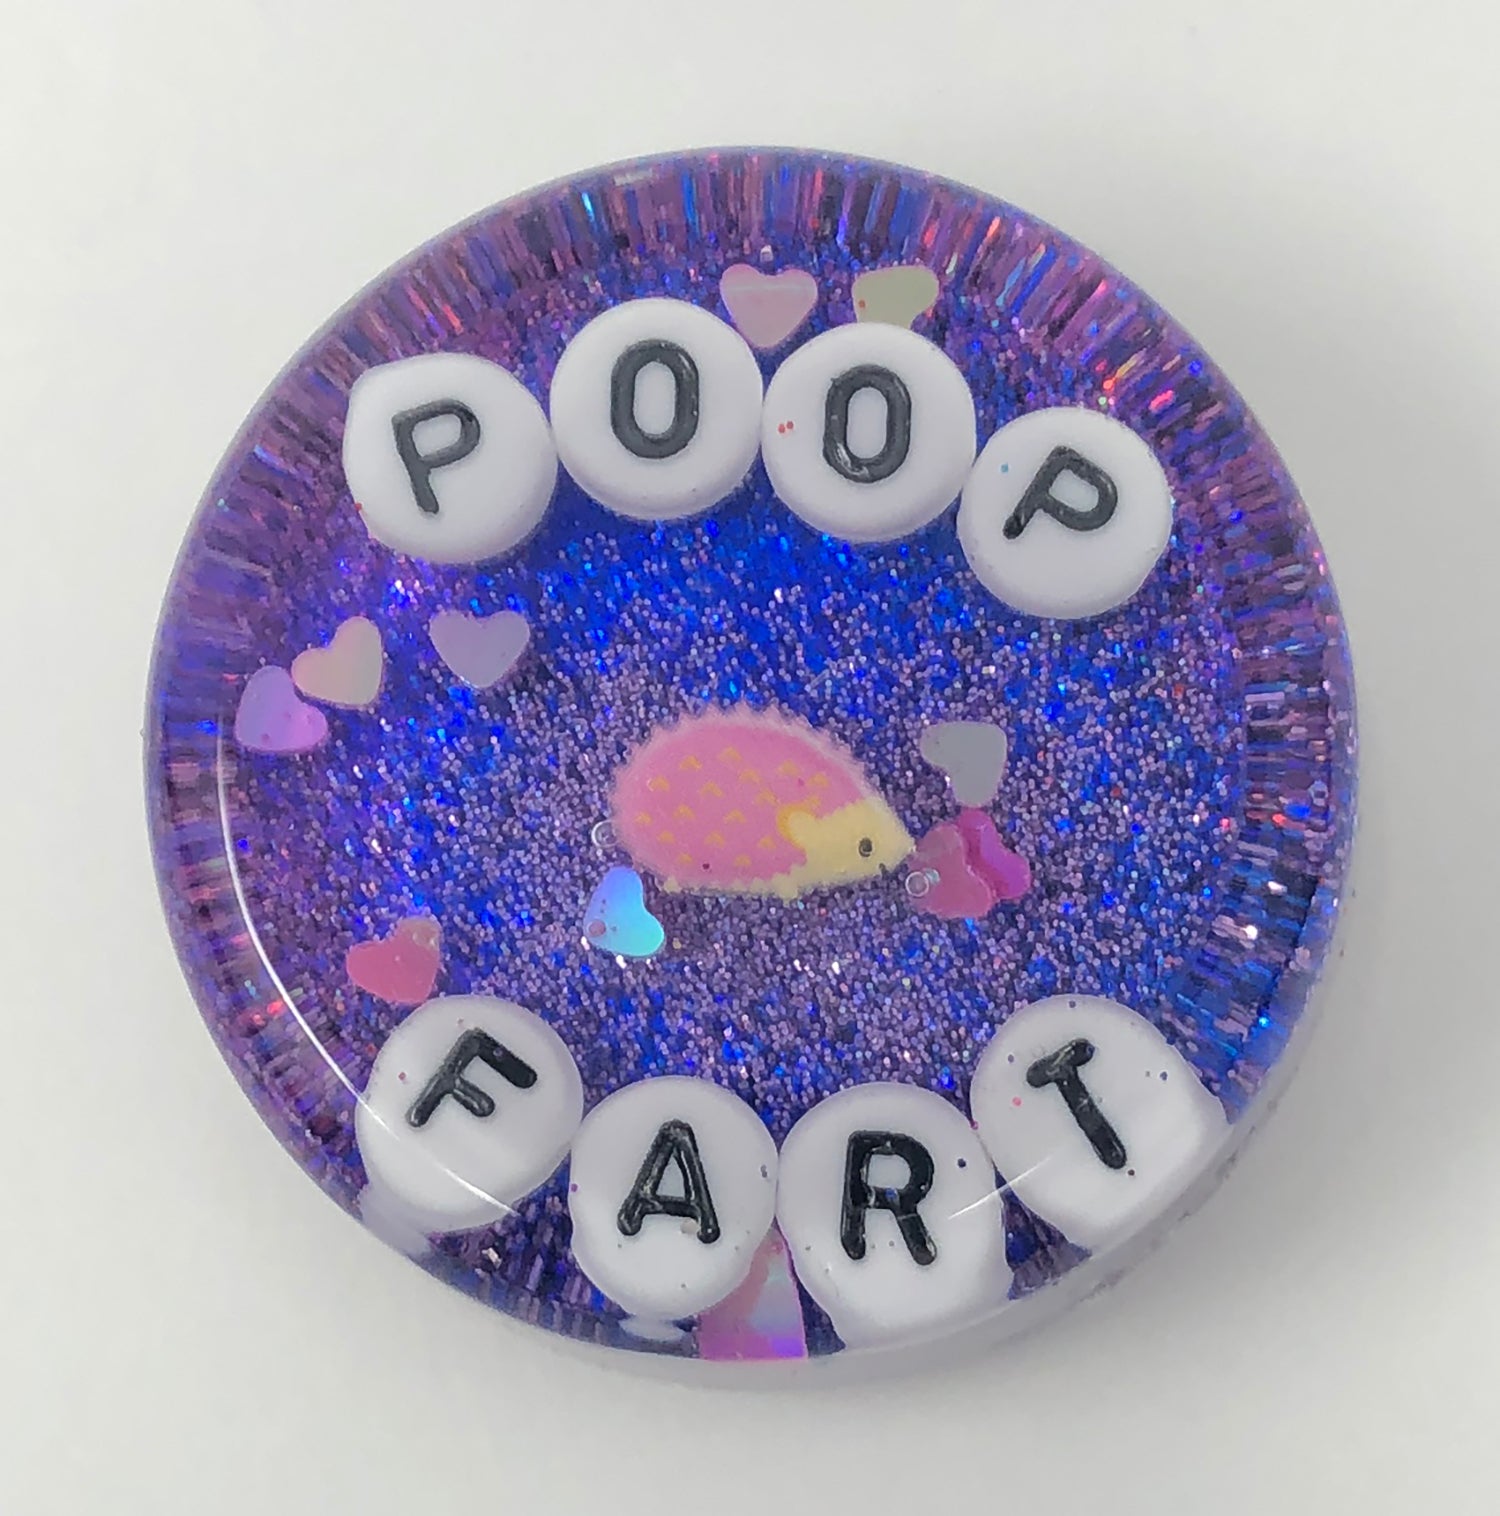 Poop Fart - Shower Art - READY TO SHIP